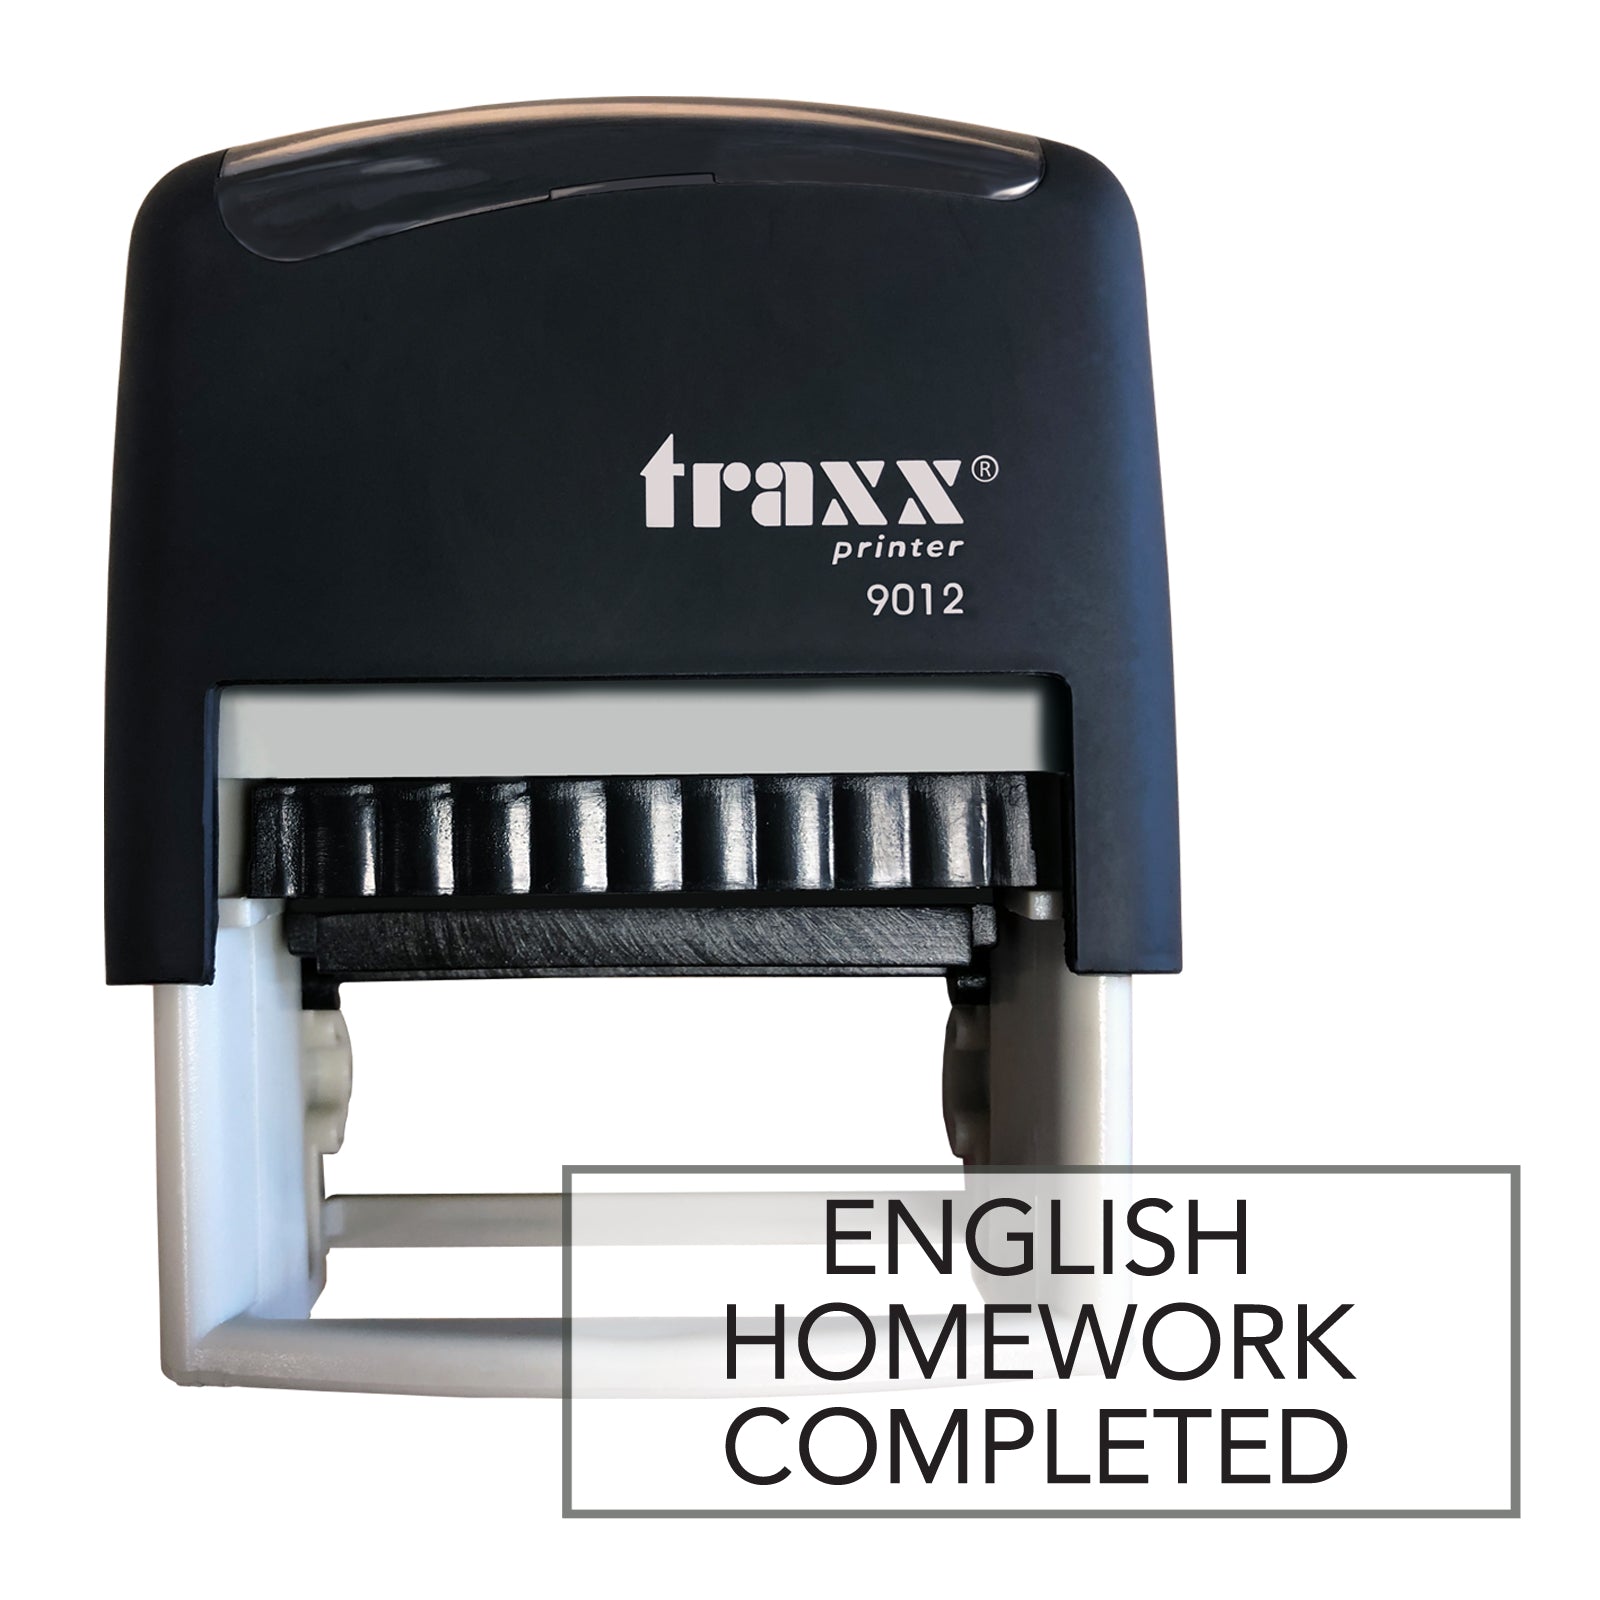 Traxx 9012 48 x 18mm Homework Completed - English